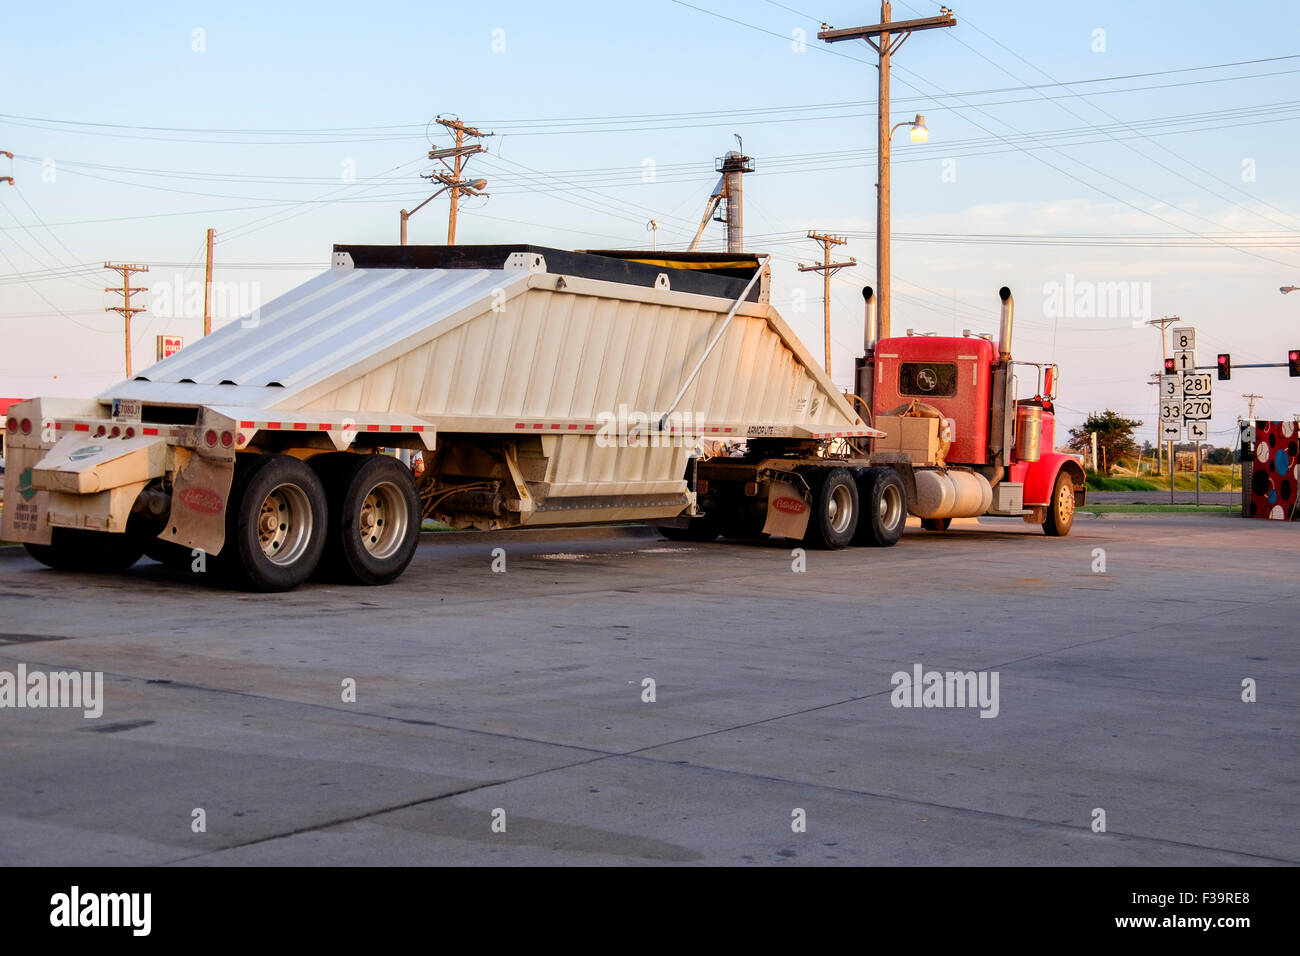 A semi truck parked in a parking lot in rural Oklahoma in evening golden light.. Stock Photo